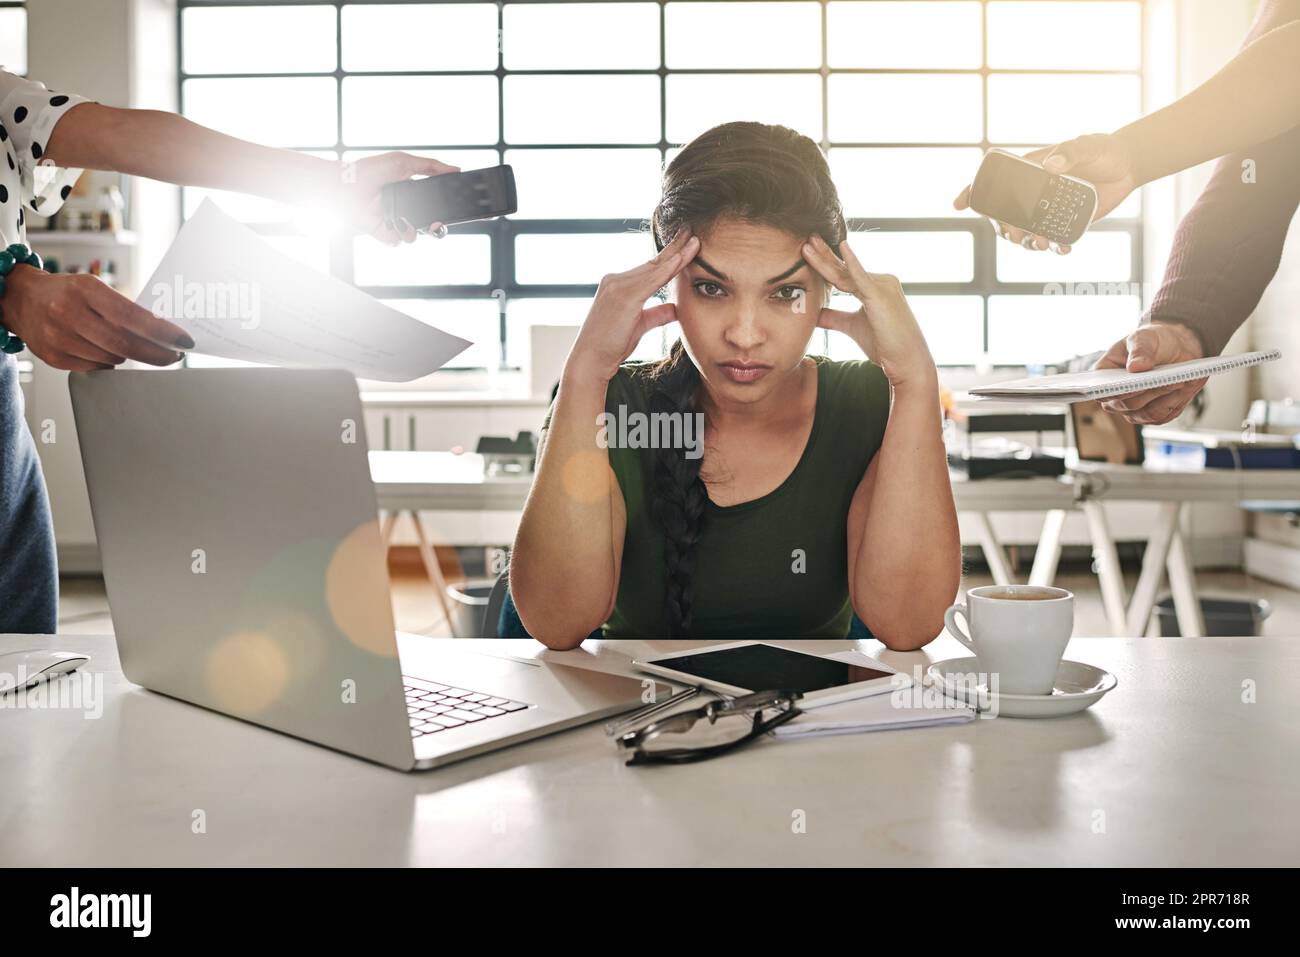 Work overload. Shot of a stressed out businesswoman surrounded by colleagues needing help. Stock Photo